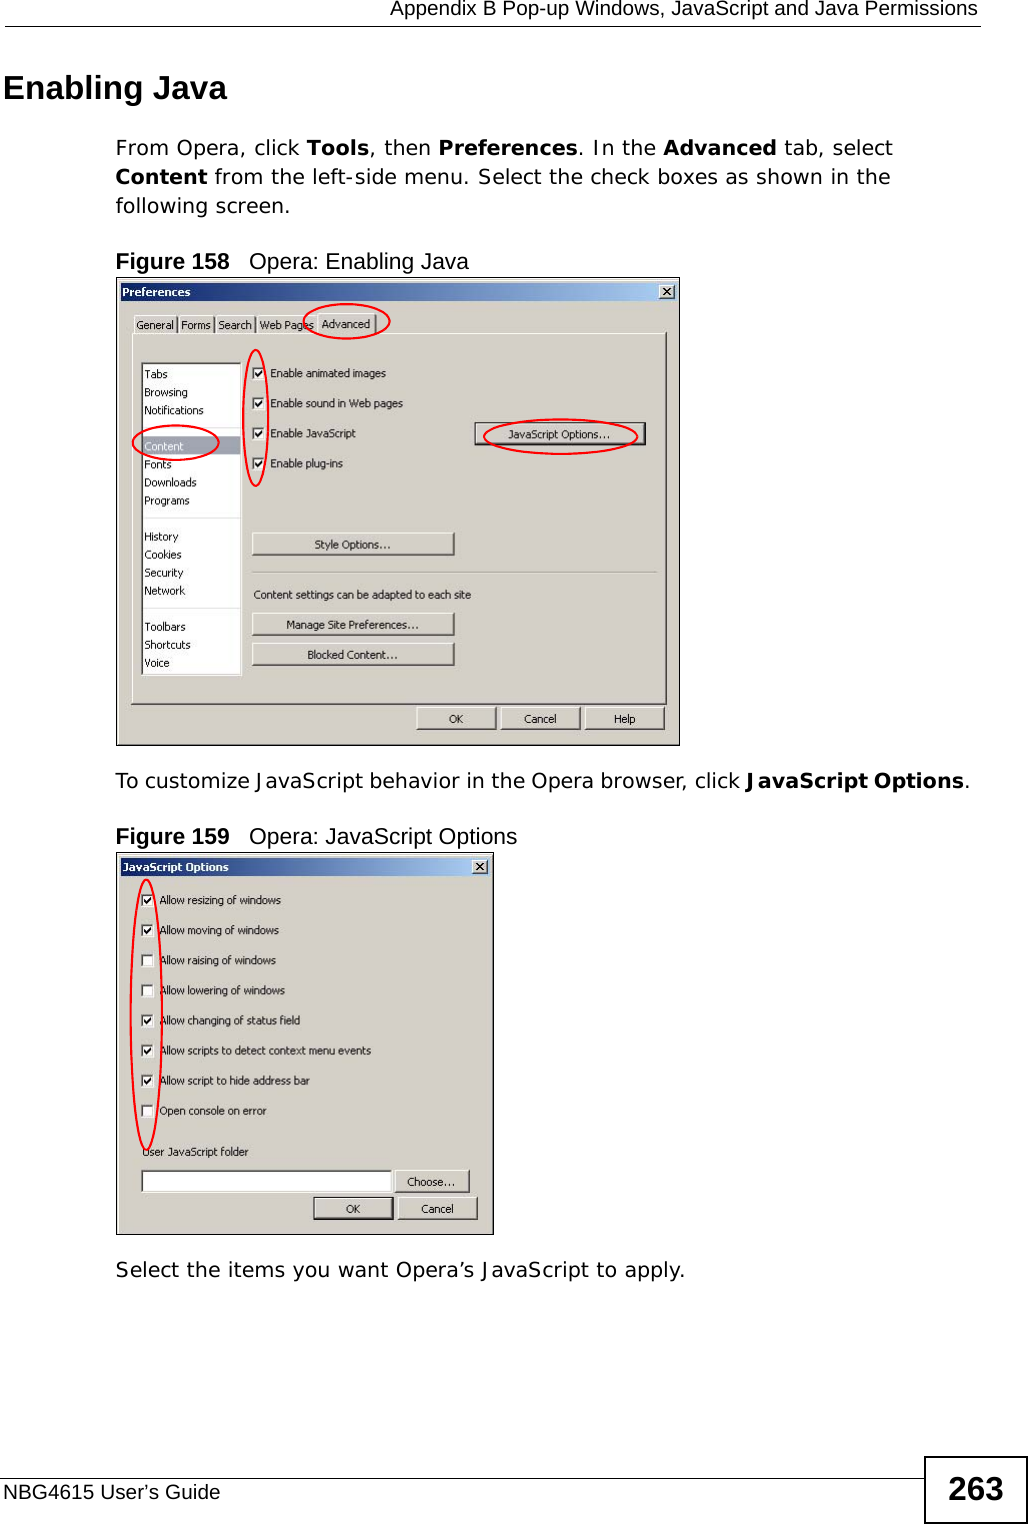  Appendix B Pop-up Windows, JavaScript and Java PermissionsNBG4615 User’s Guide 263Enabling JavaFrom Opera, click Tools, then Preferences. In the Advanced tab, select Content from the left-side menu. Select the check boxes as shown in the following screen.Figure 158   Opera: Enabling JavaTo customize JavaScript behavior in the Opera browser, click JavaScript Options. Figure 159   Opera: JavaScript OptionsSelect the items you want Opera’s JavaScript to apply.